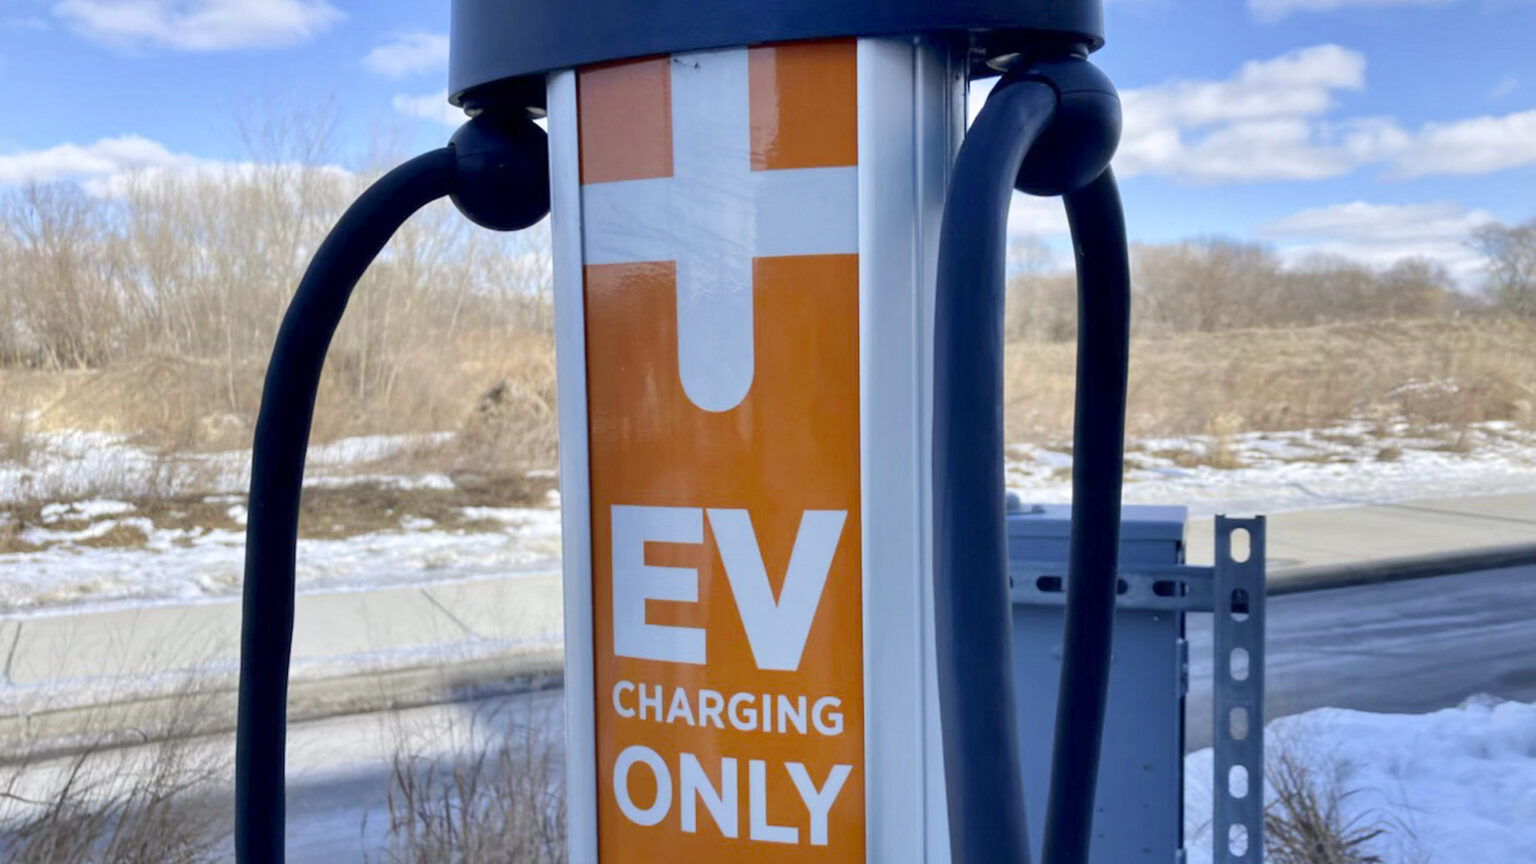 An electric car charging station with connection cords stands in front of a road, sidewalk and field with some snow on the ground.